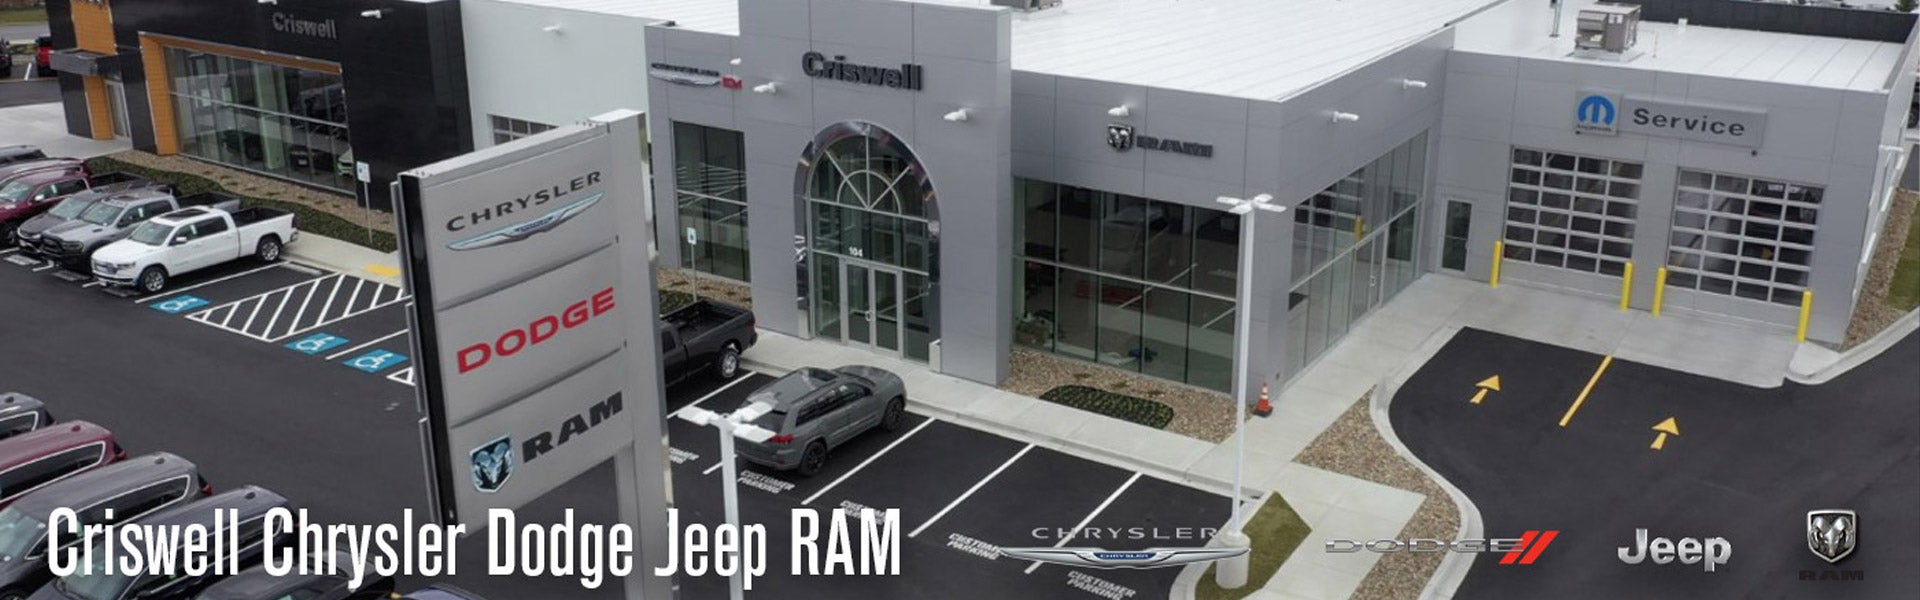 Criswell Chrysler Dodge Jeep Ram